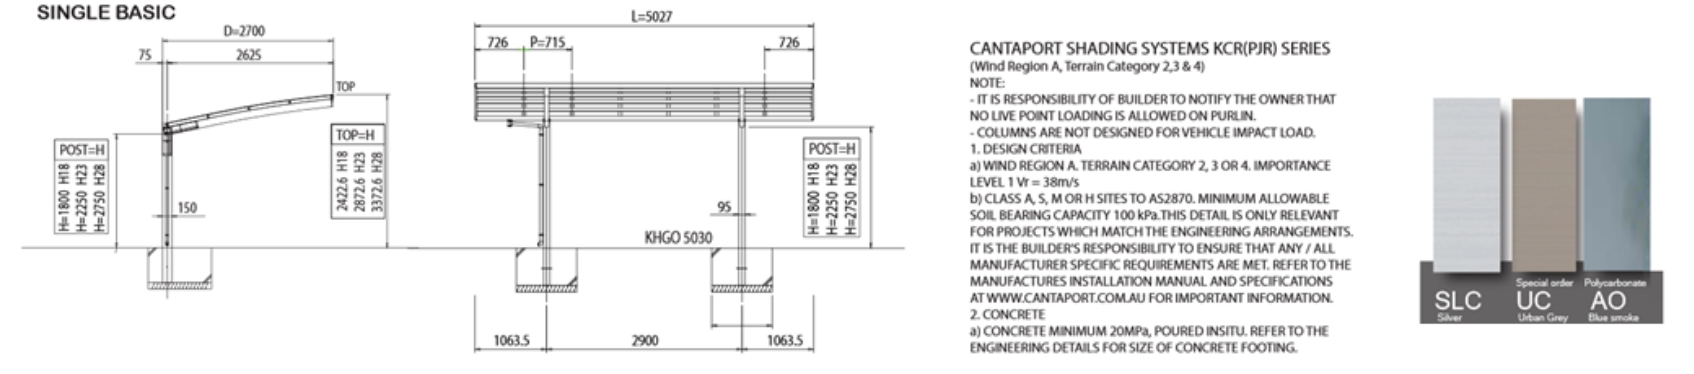 Cantilever Carports - Cantaport pergolas and awnings - installation diagram